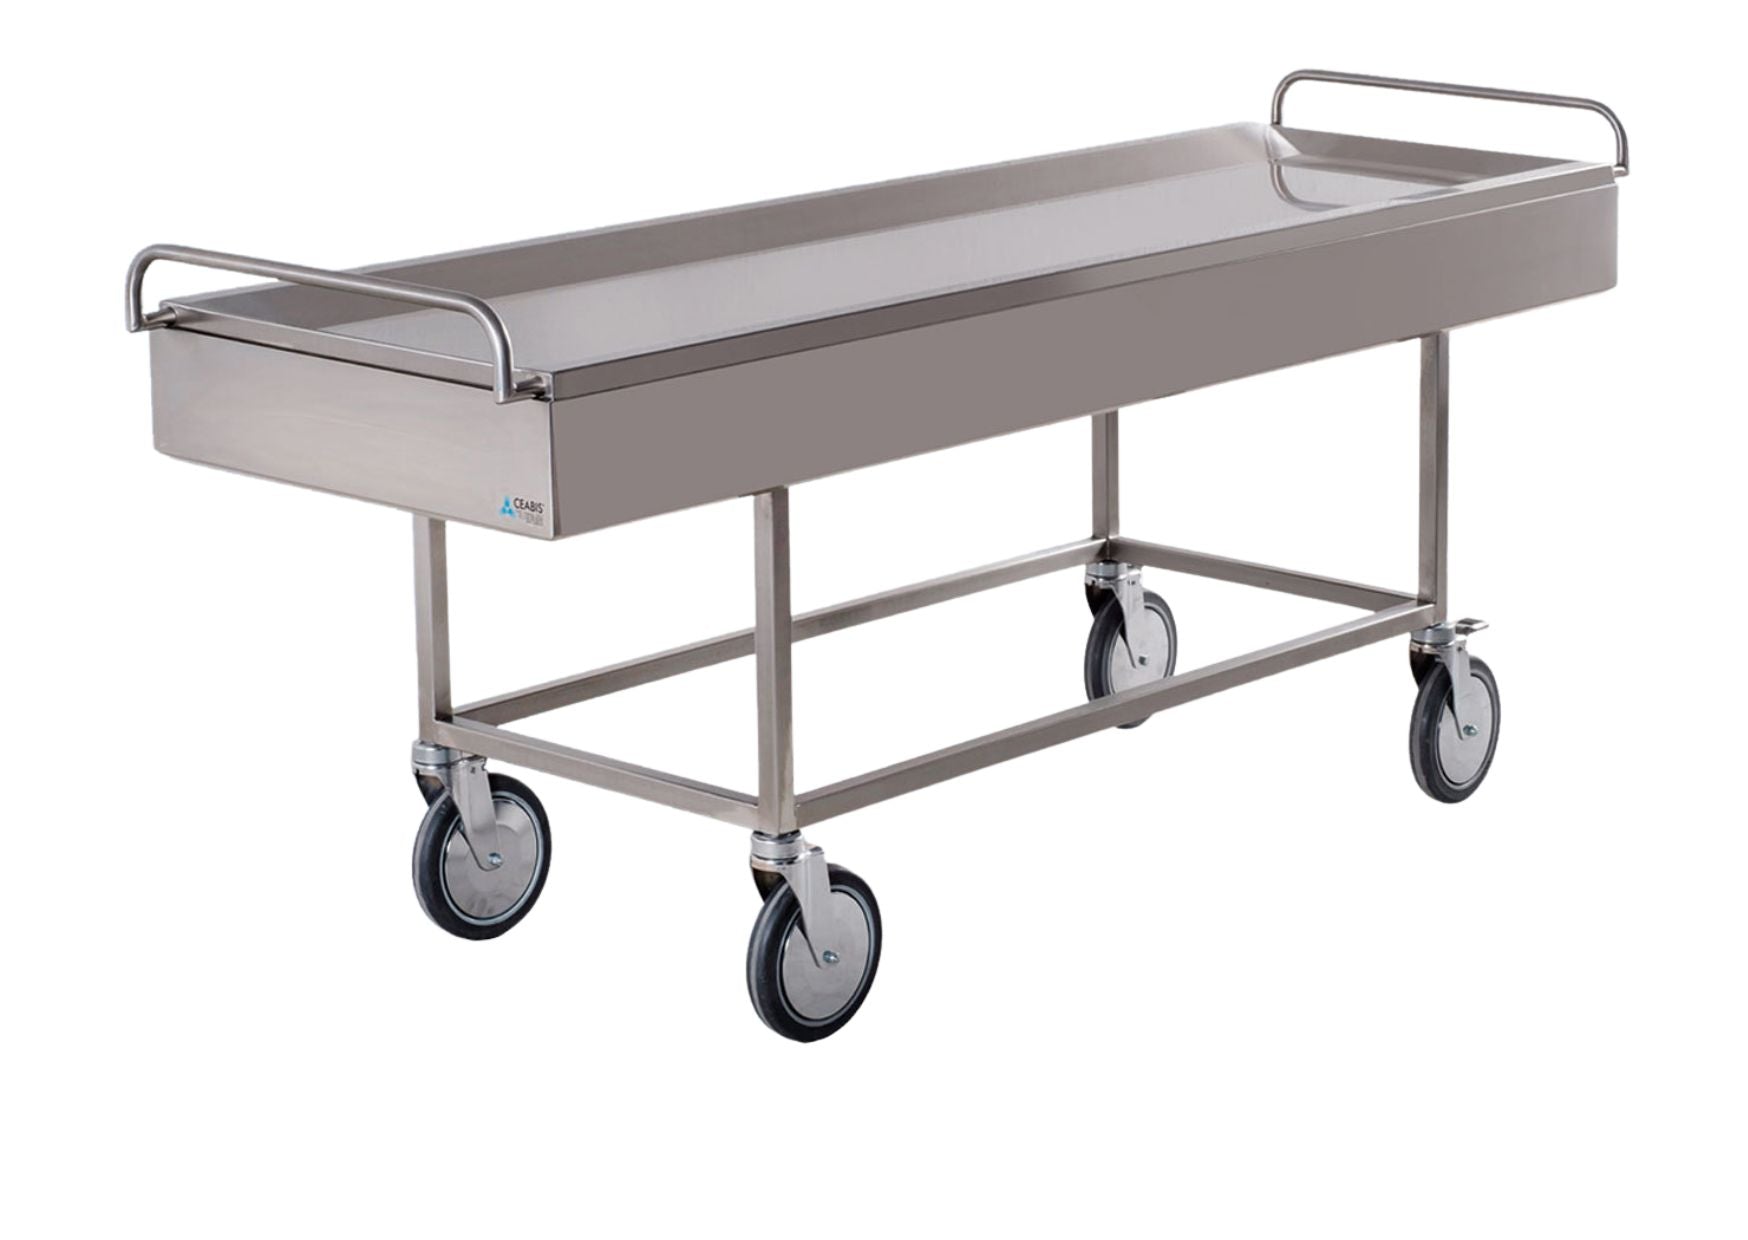 Stainless steel transport trolley for indoor use